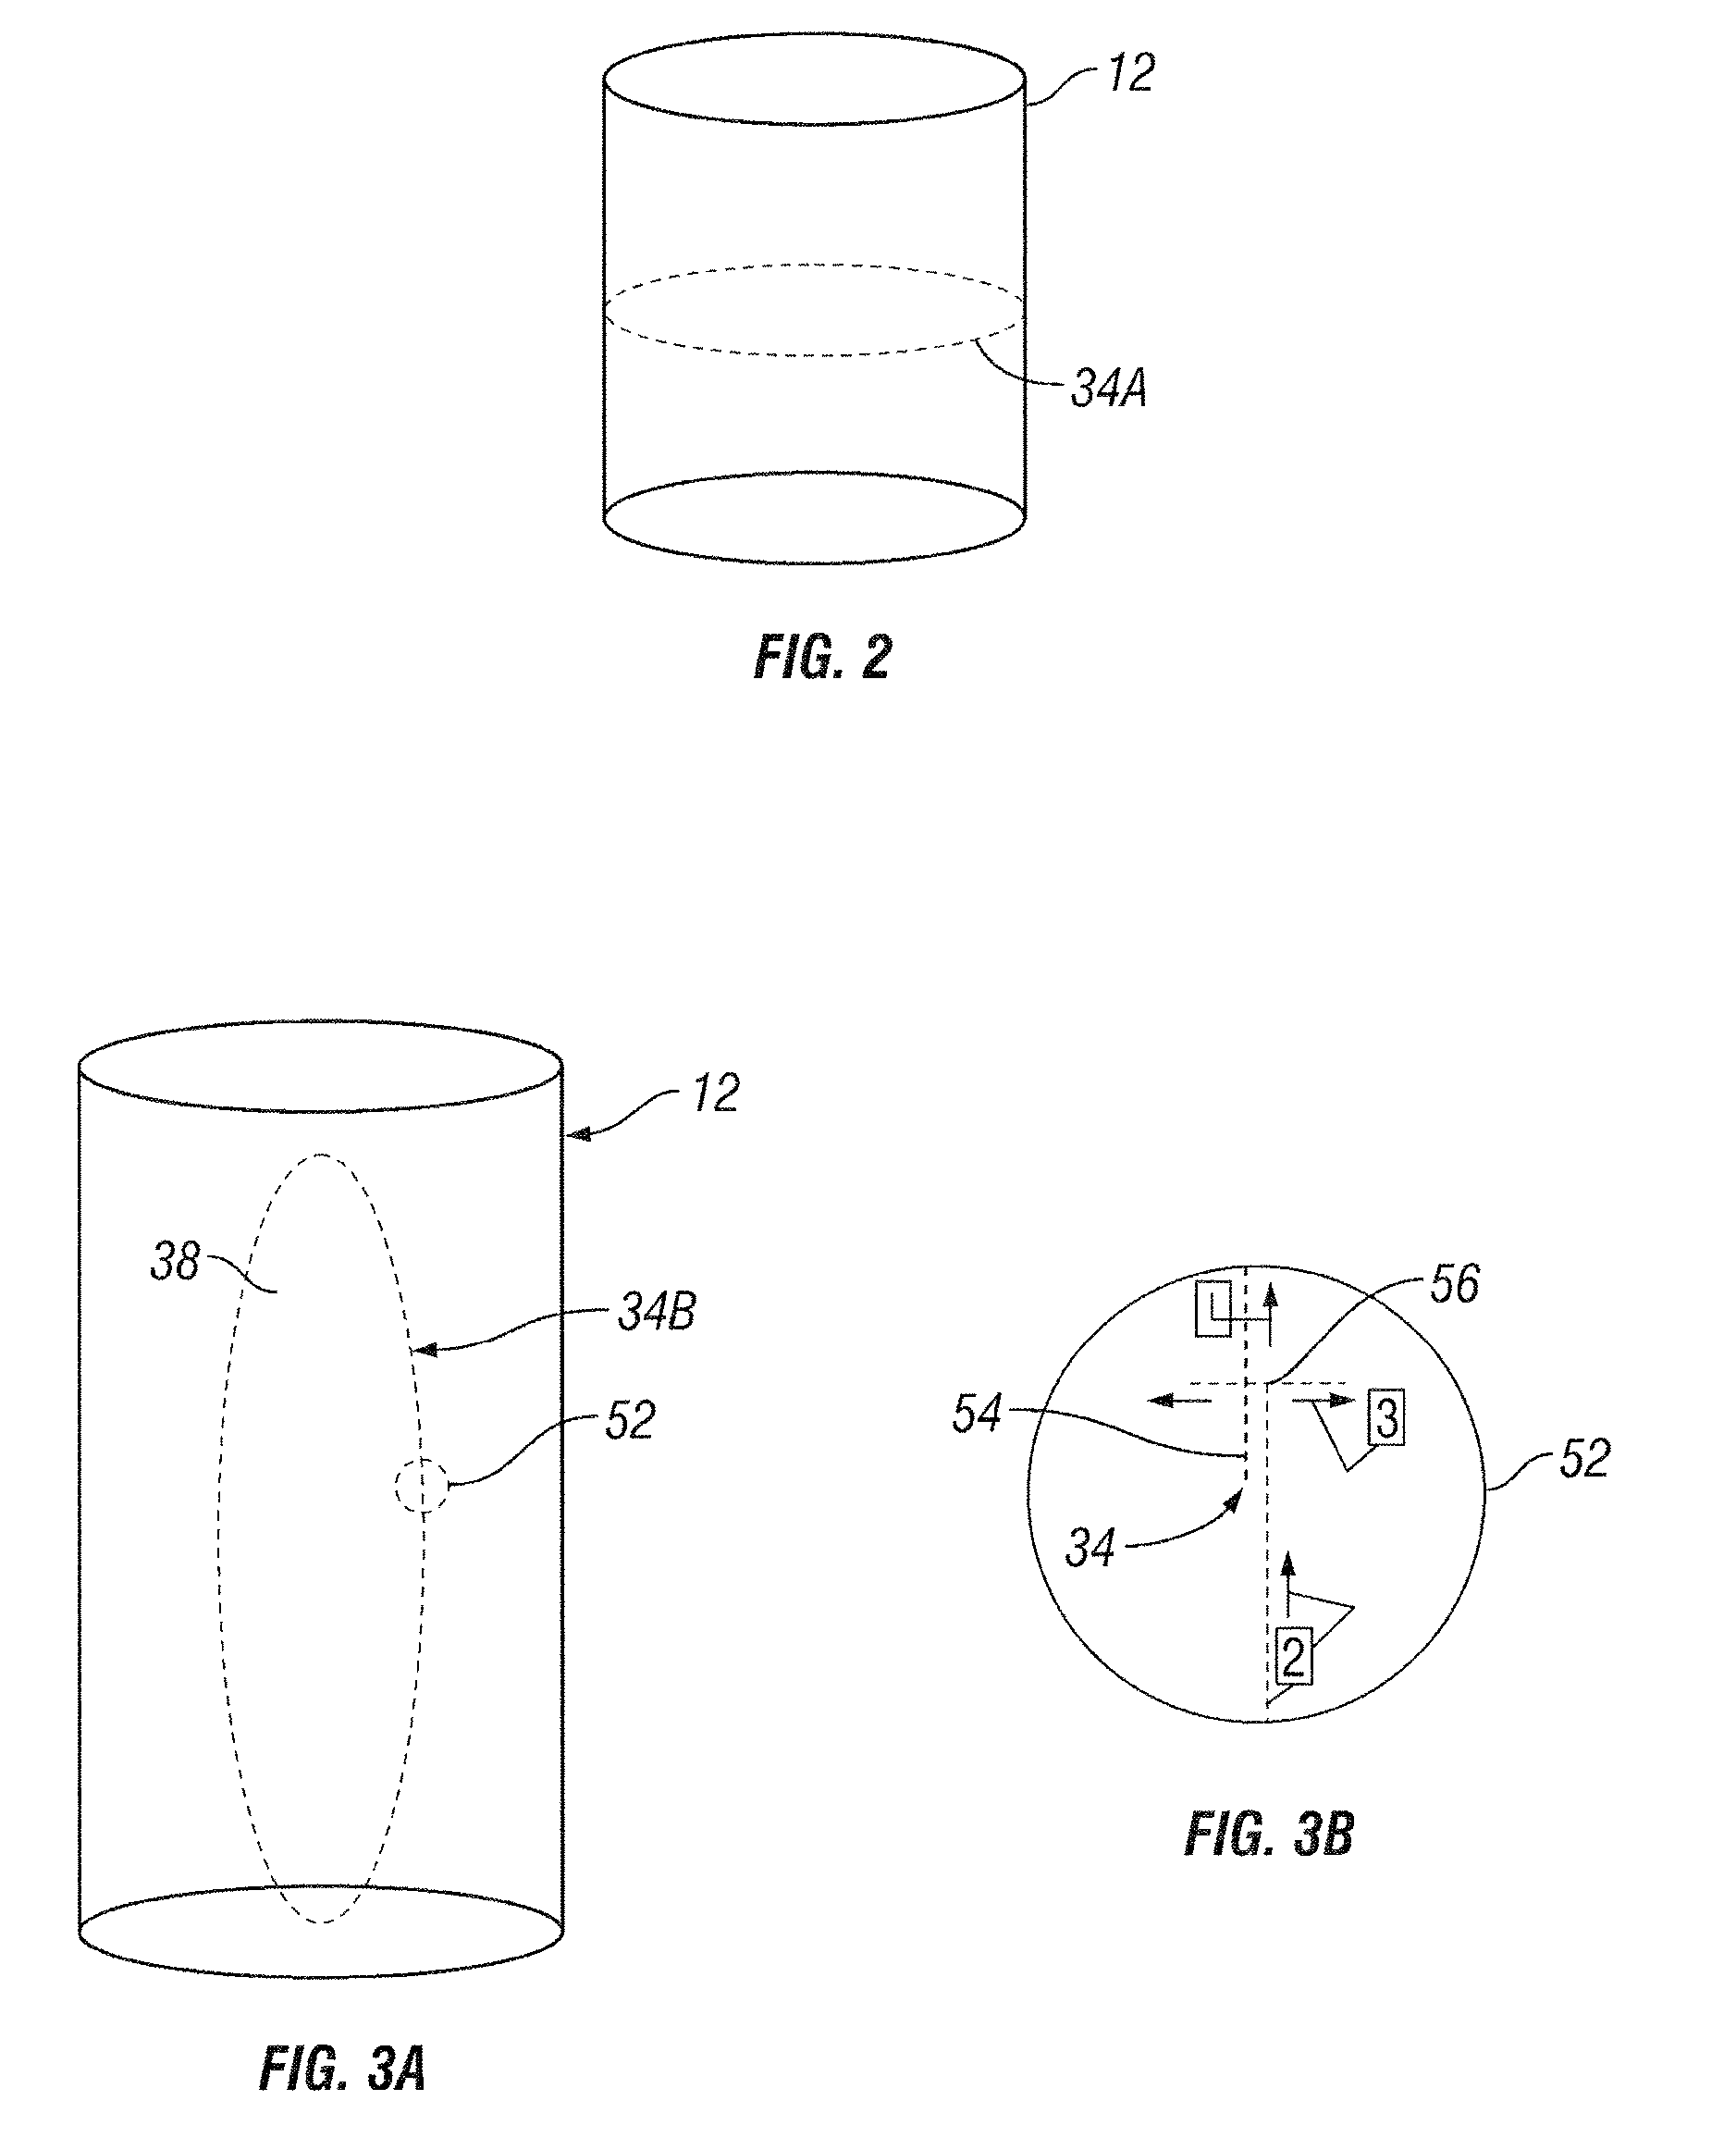 Abrasive jet cutting system and method for cutting wellbore tubulars